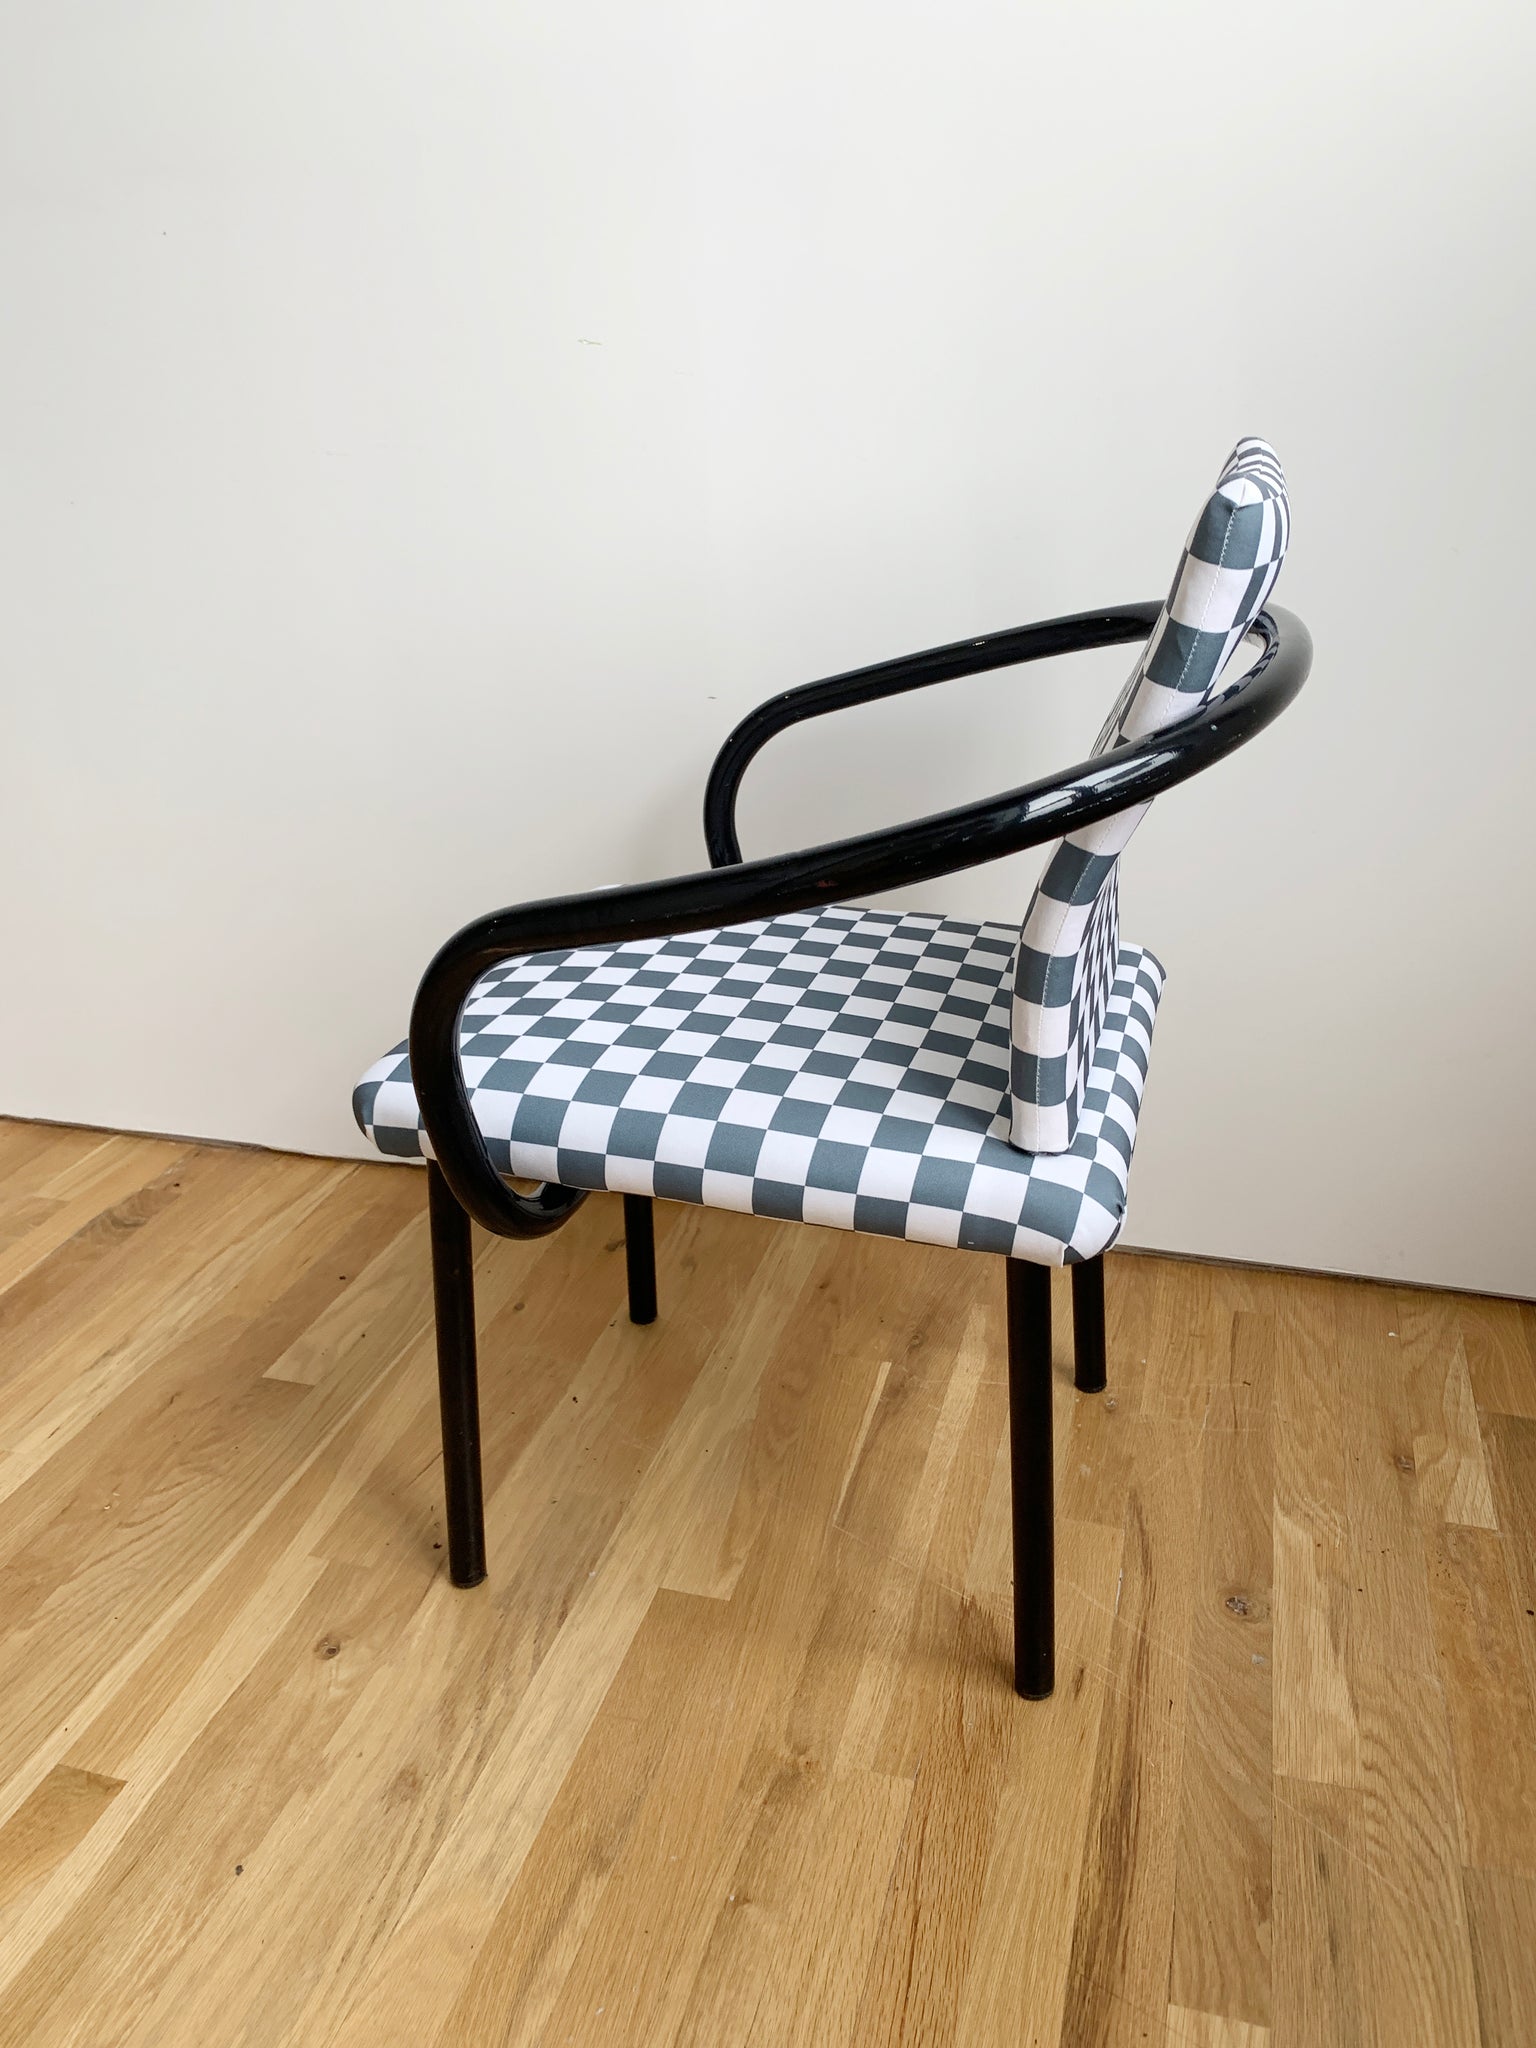 Vintage Ettore Sottsass for Knoll Mandarin Chair in Grey Checked Print - Single